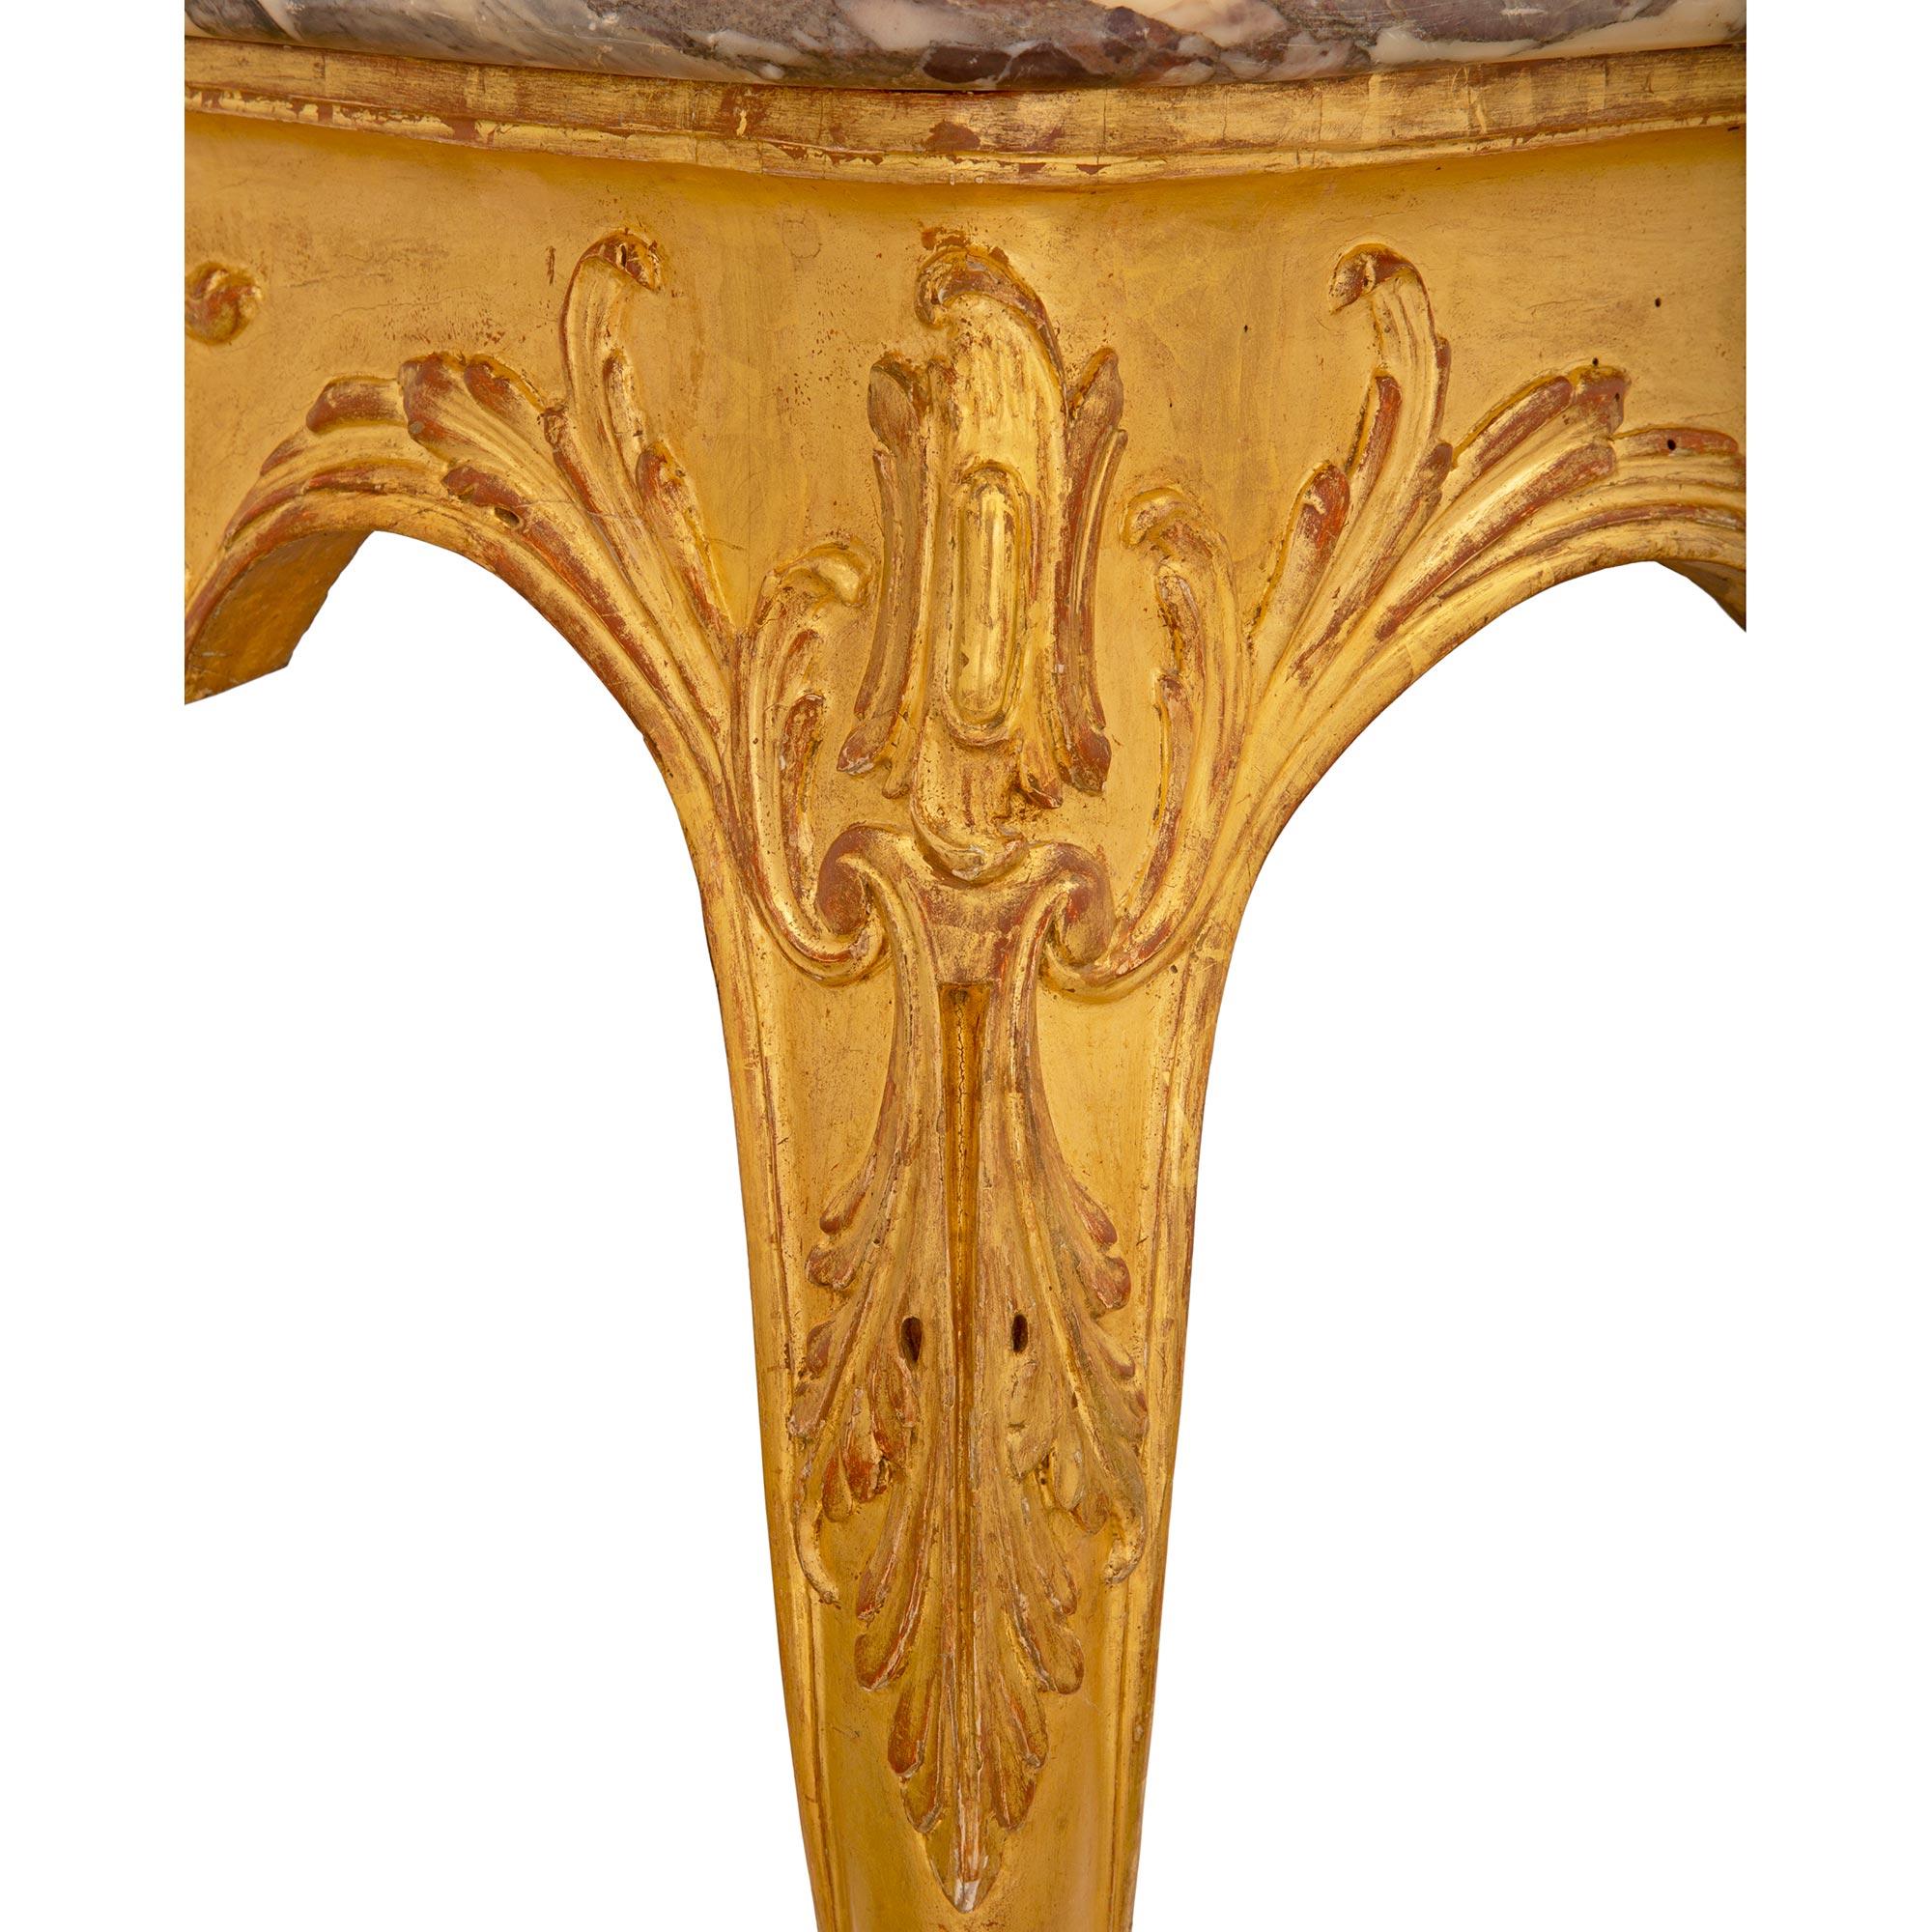 Italian Mid-18th Century Louis XV Period Giltwood and Marble Center Table For Sale 2